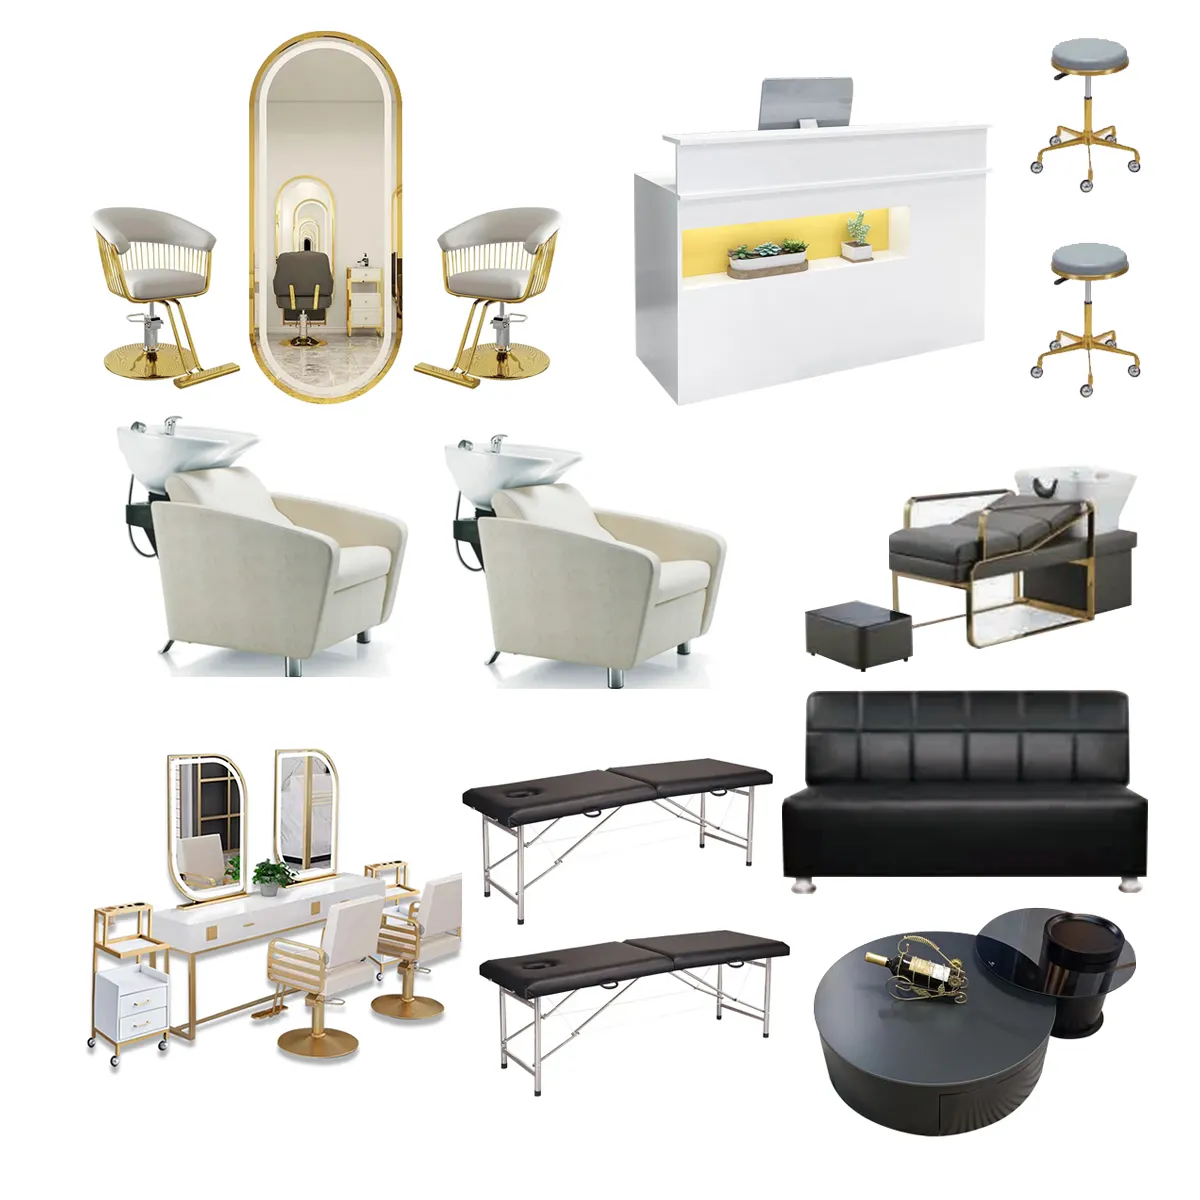 luxury beauty hair salon equipment and furniture sets white barber salon chairs and hair salon mirror set for ladies